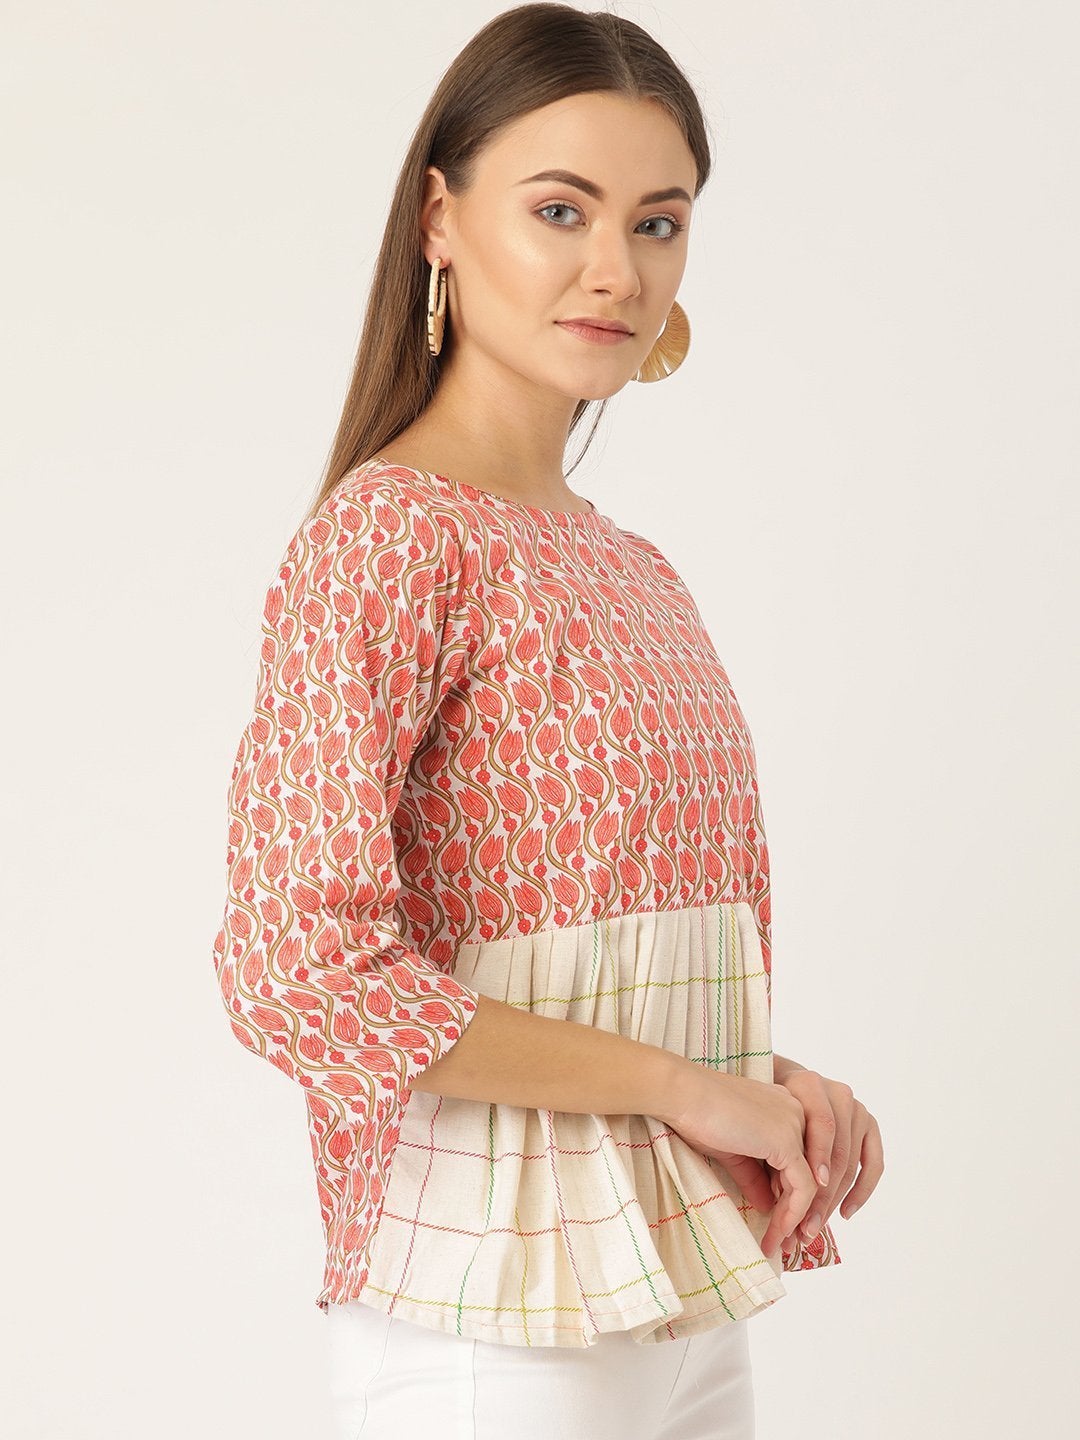 Women's Pink Floral Frill Top - InWeave